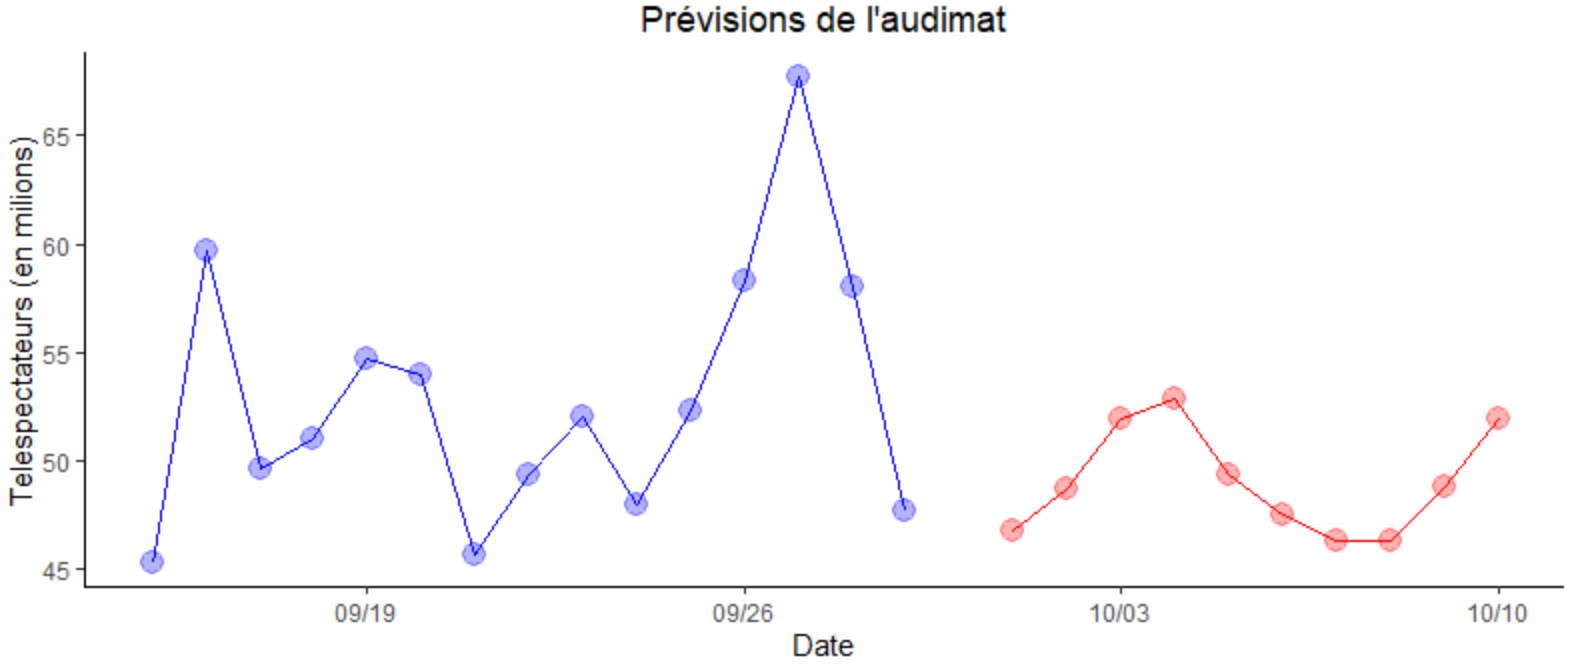 R timeseries regression lineaire ajustement lm linear